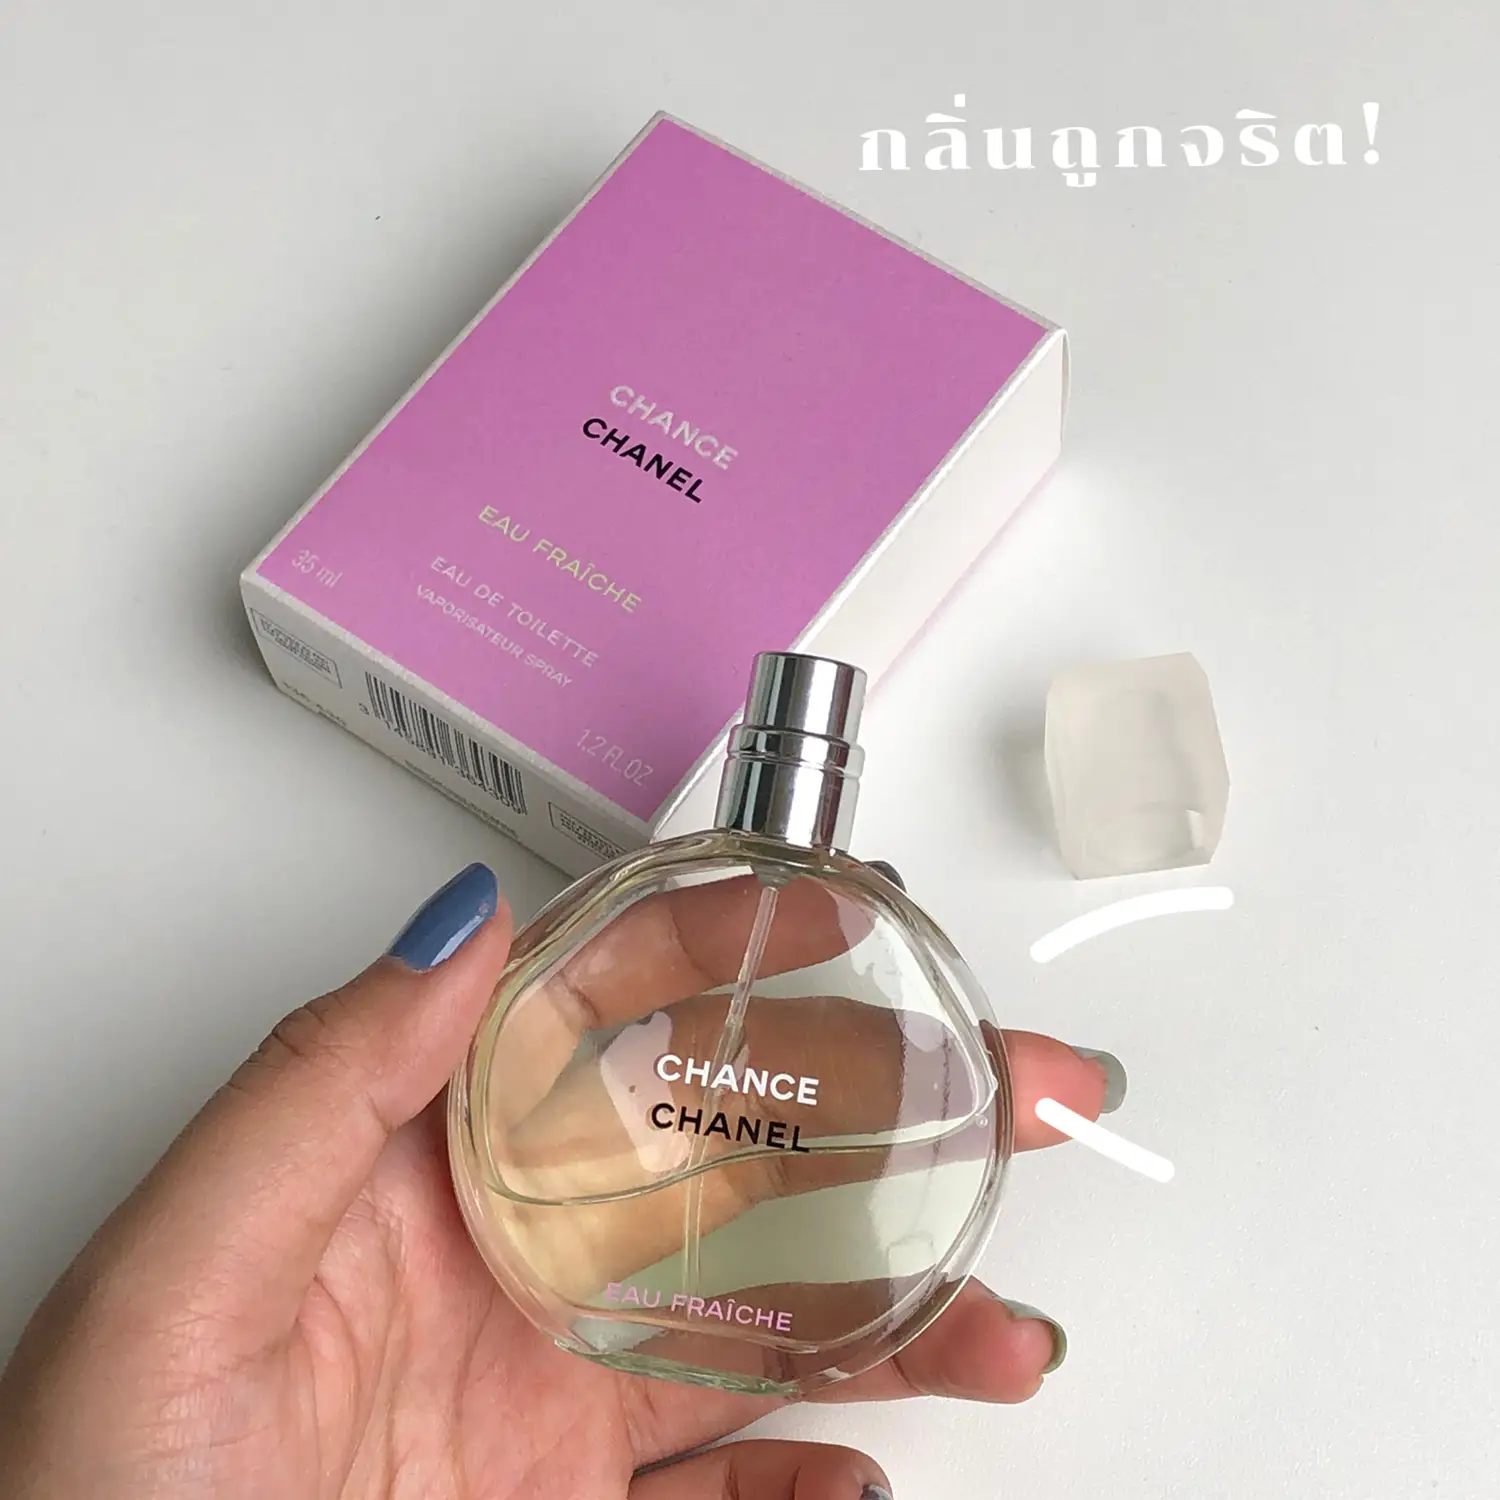 Dupe for Chanel Chance Eau Tendre = Fine'ry Flower Bed – Scent